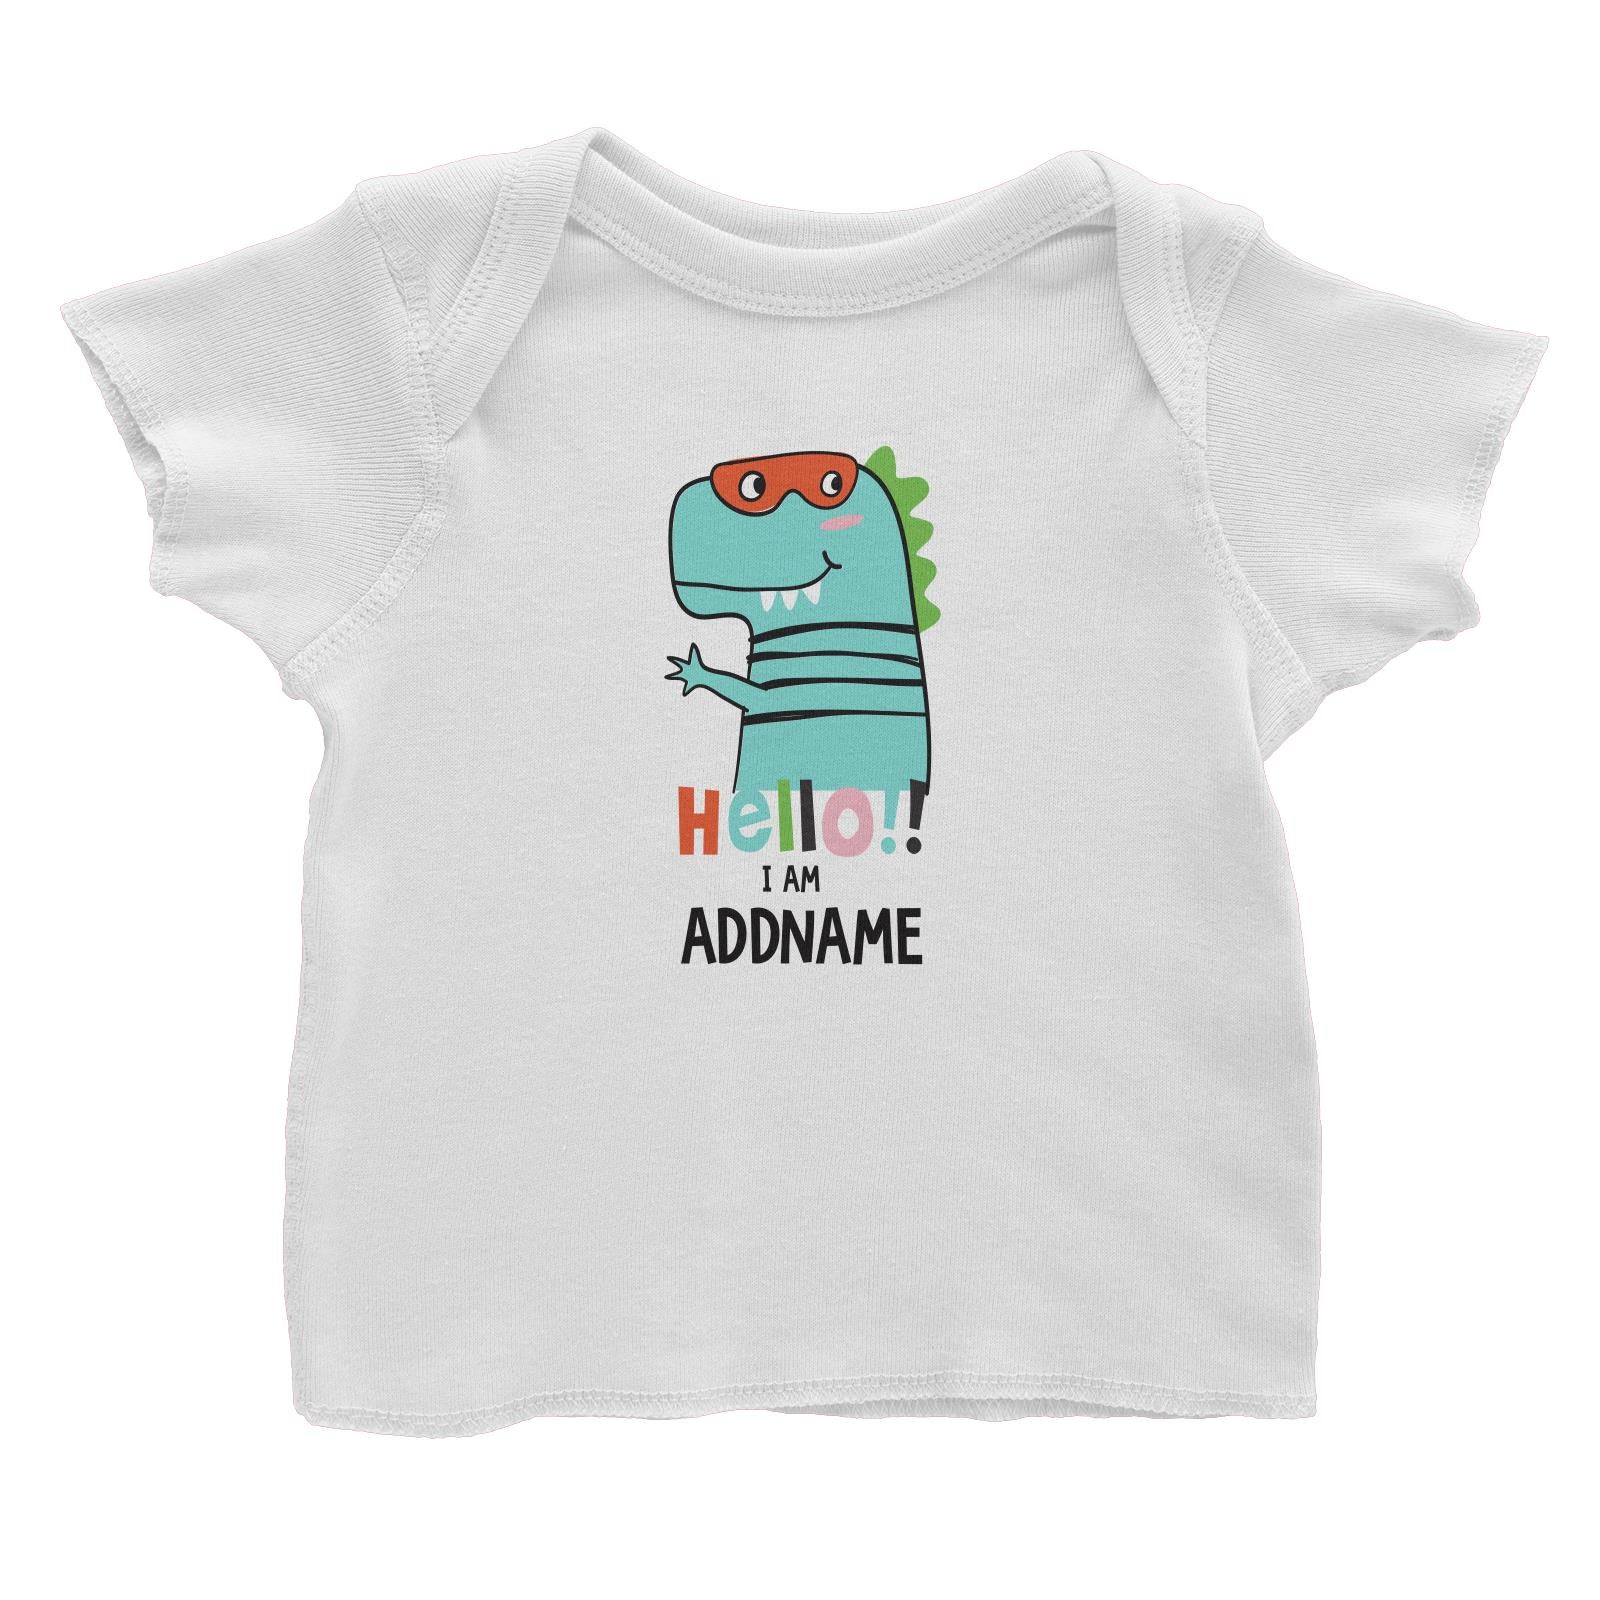 Cool Vibrant Series Hello I Am Dinosaur Addname Baby T-Shirt [SALE]